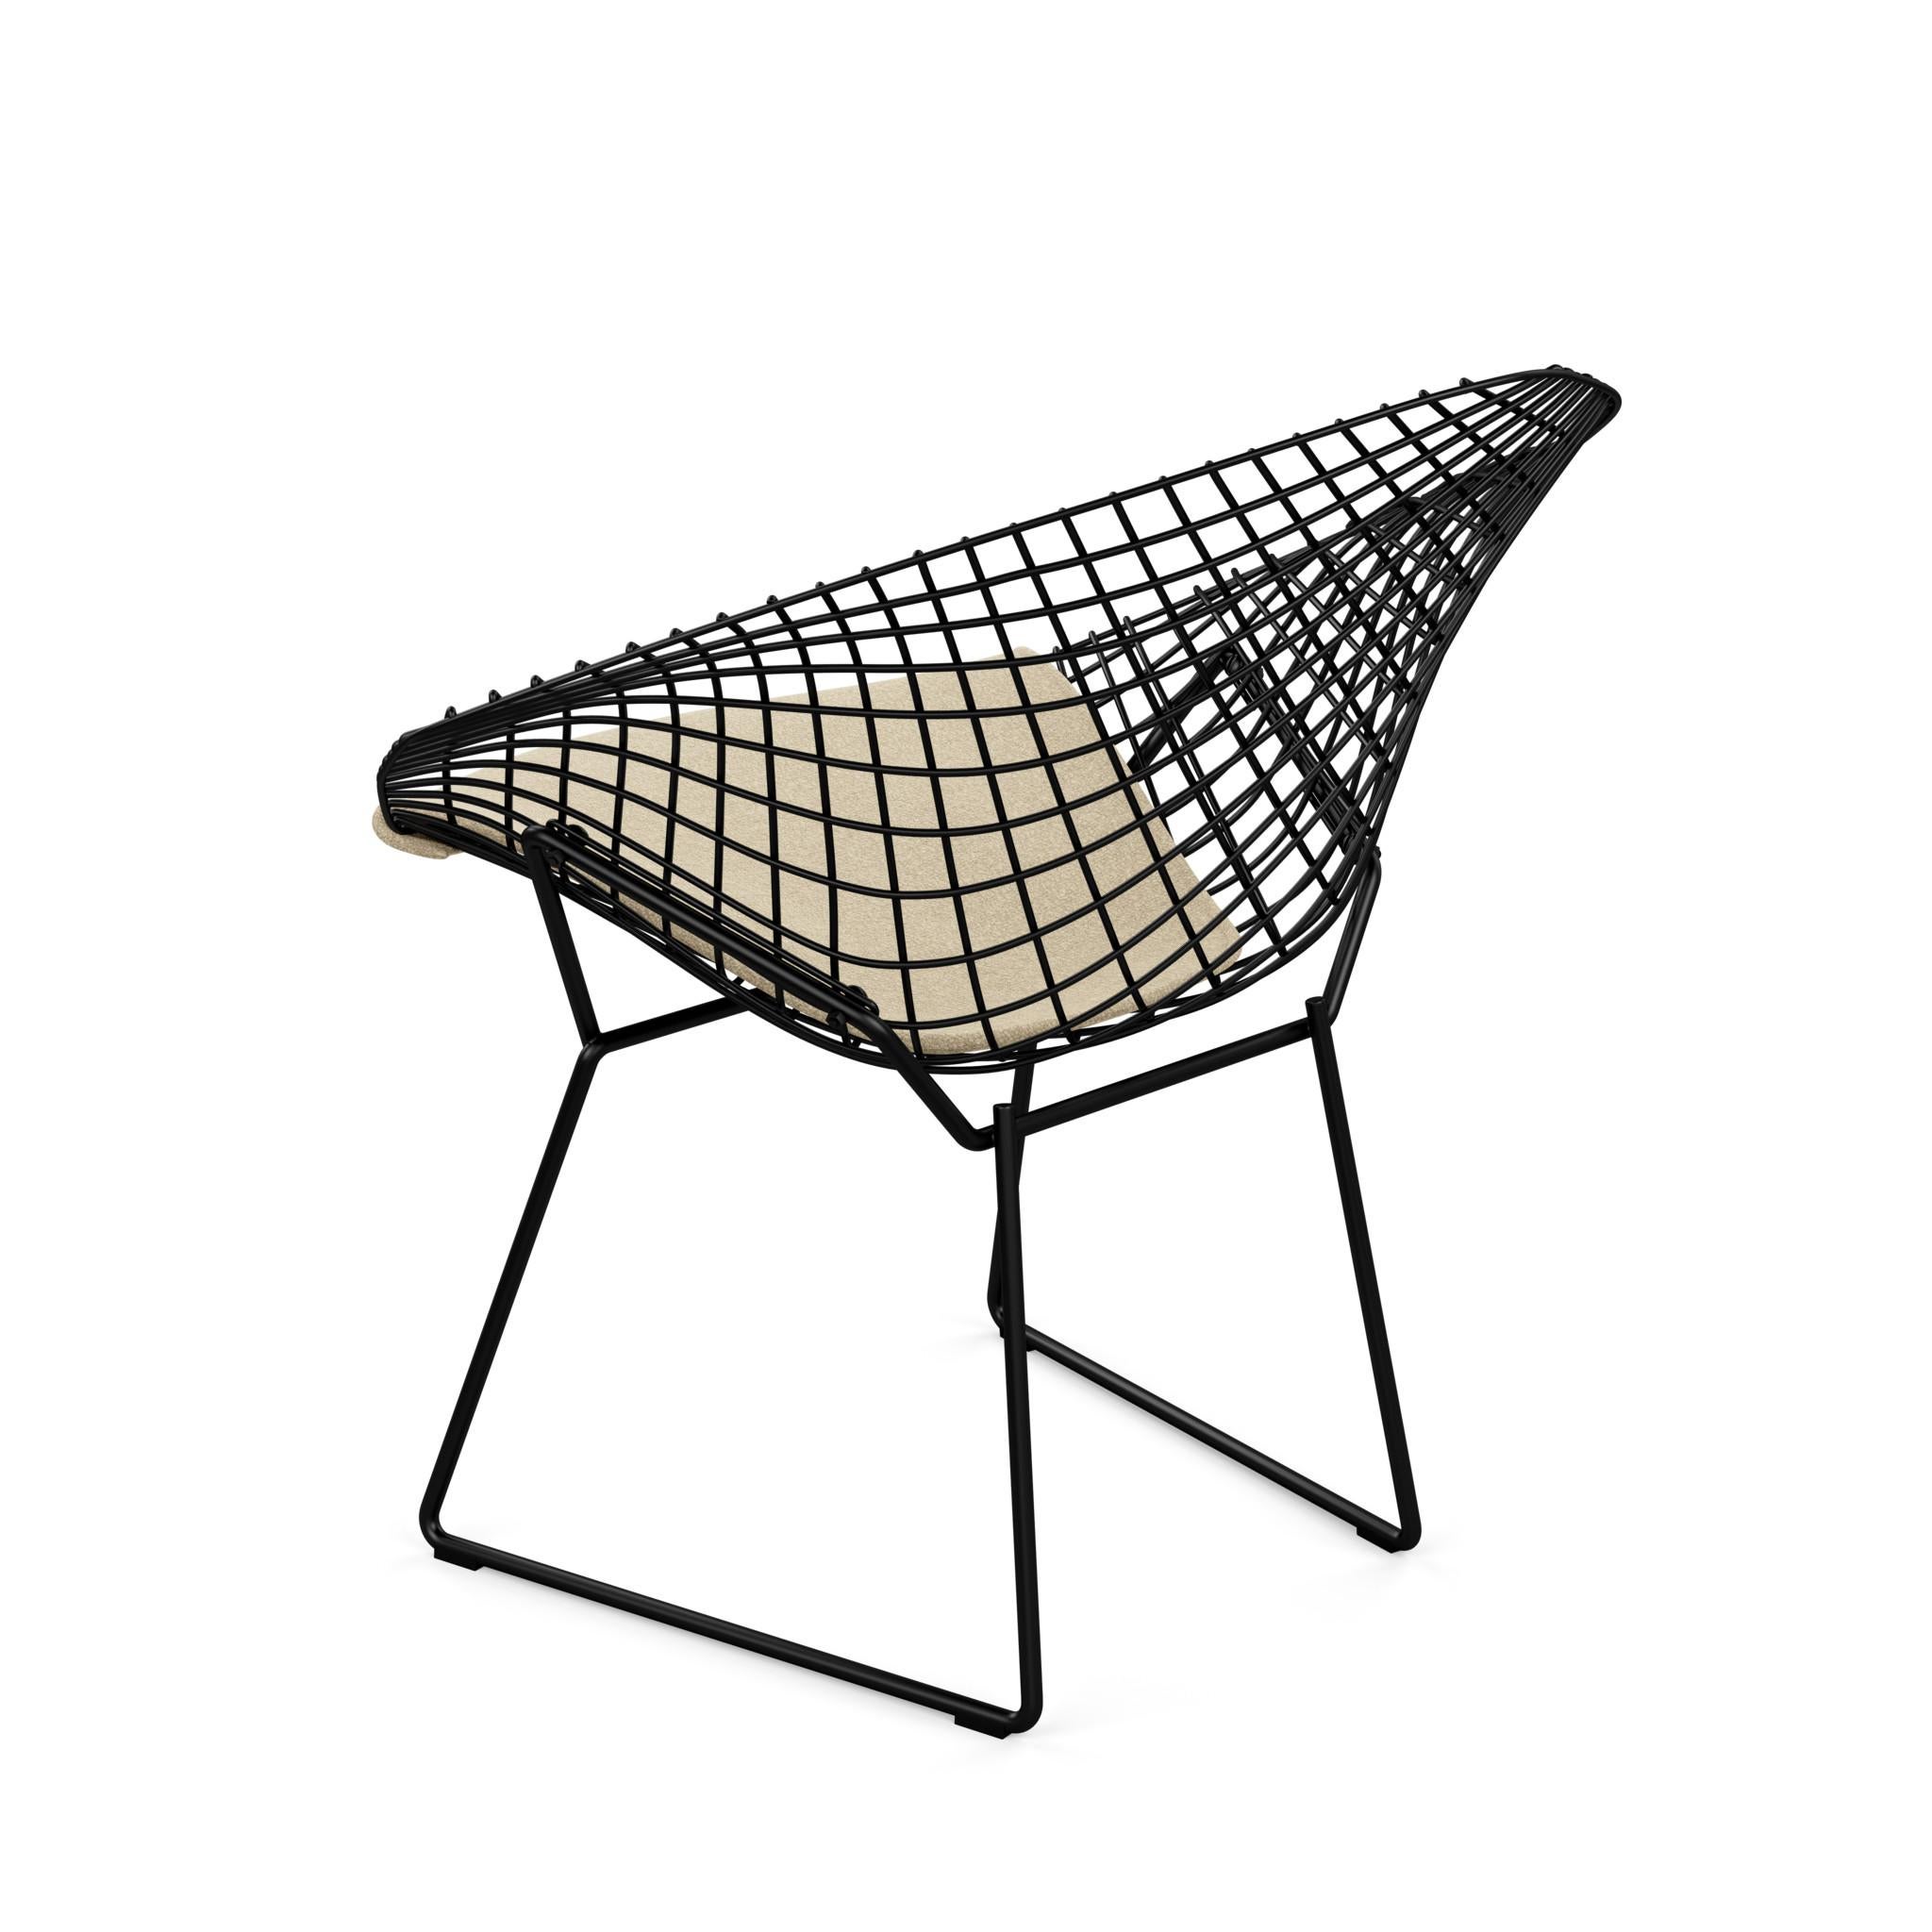 The Diamond Chair is an astounding study in space, form and function by one of the master sculptors of the last century. Harry Bertoia found sublime grace in an industrial material, elevating it beyond its normal utility into a work of art. Harry